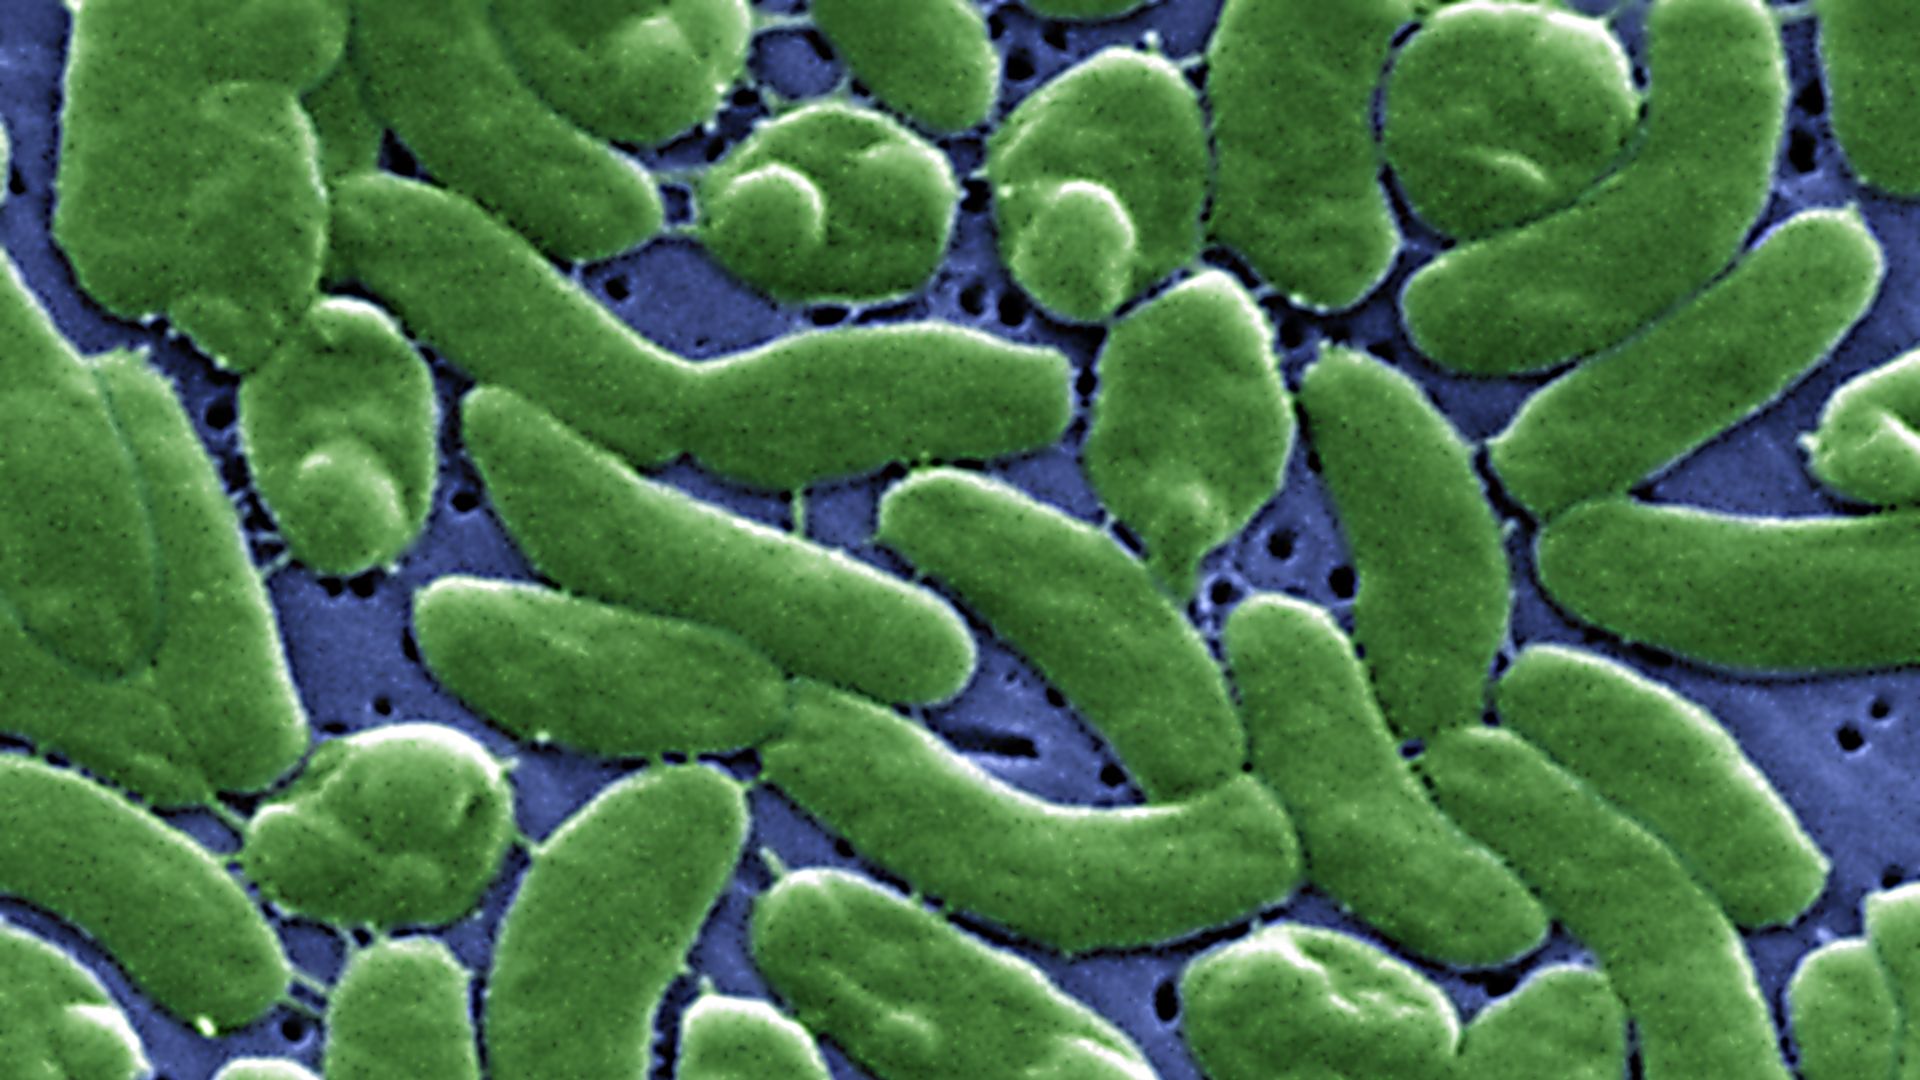 Vibrio vulnificus bacteria seen by an electronic microscope.